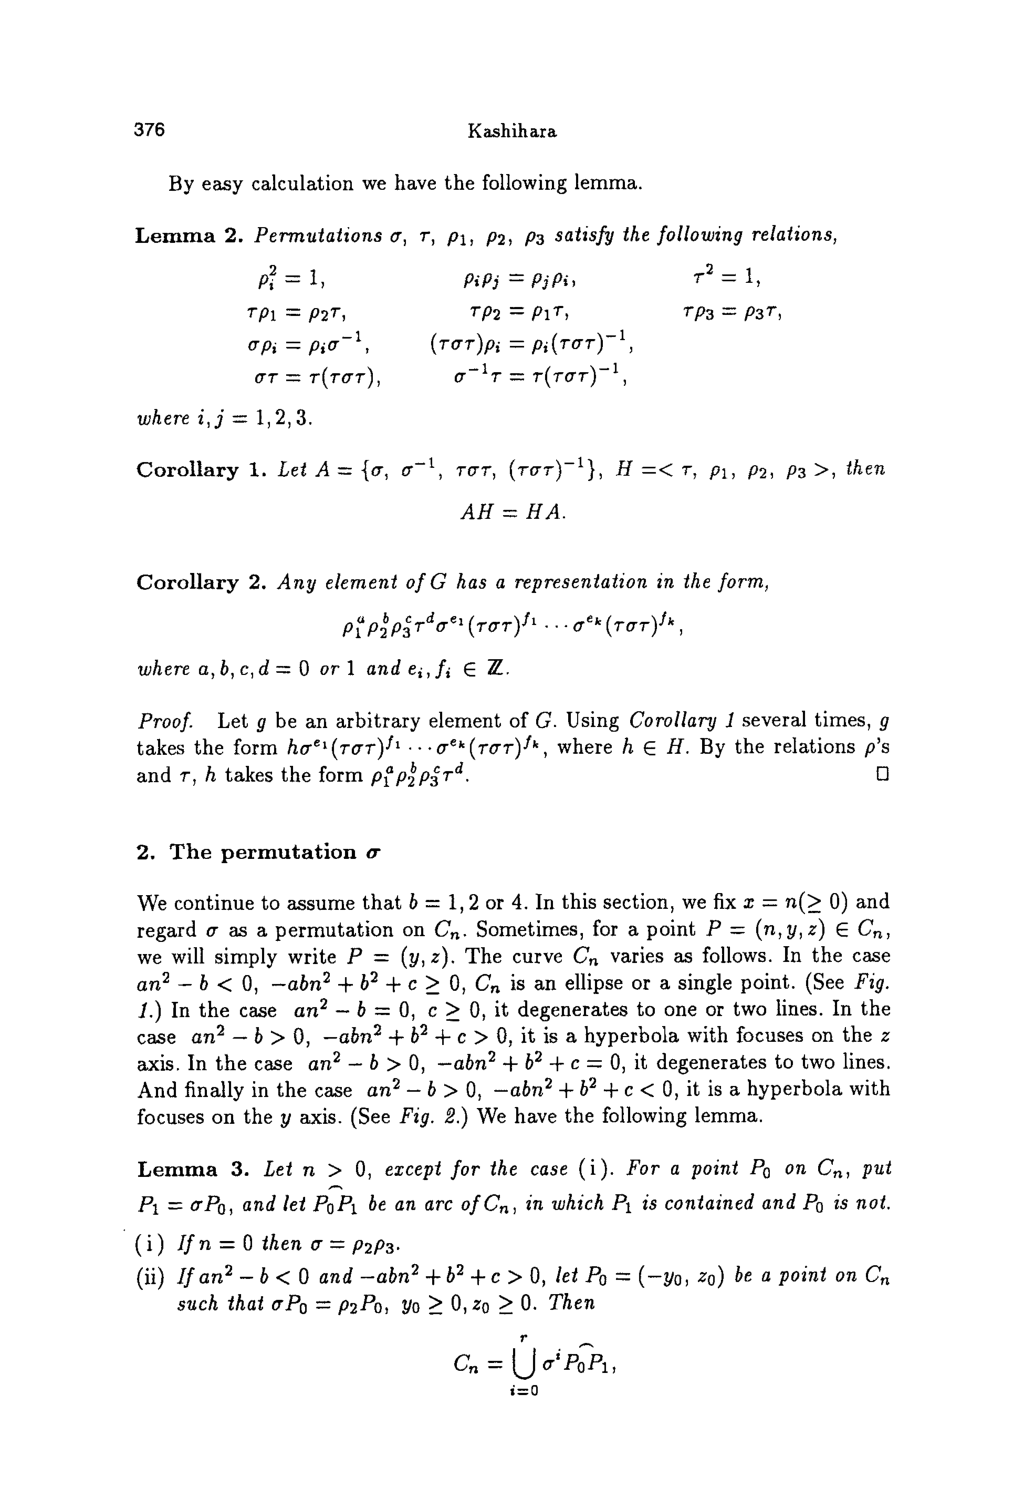 page 4